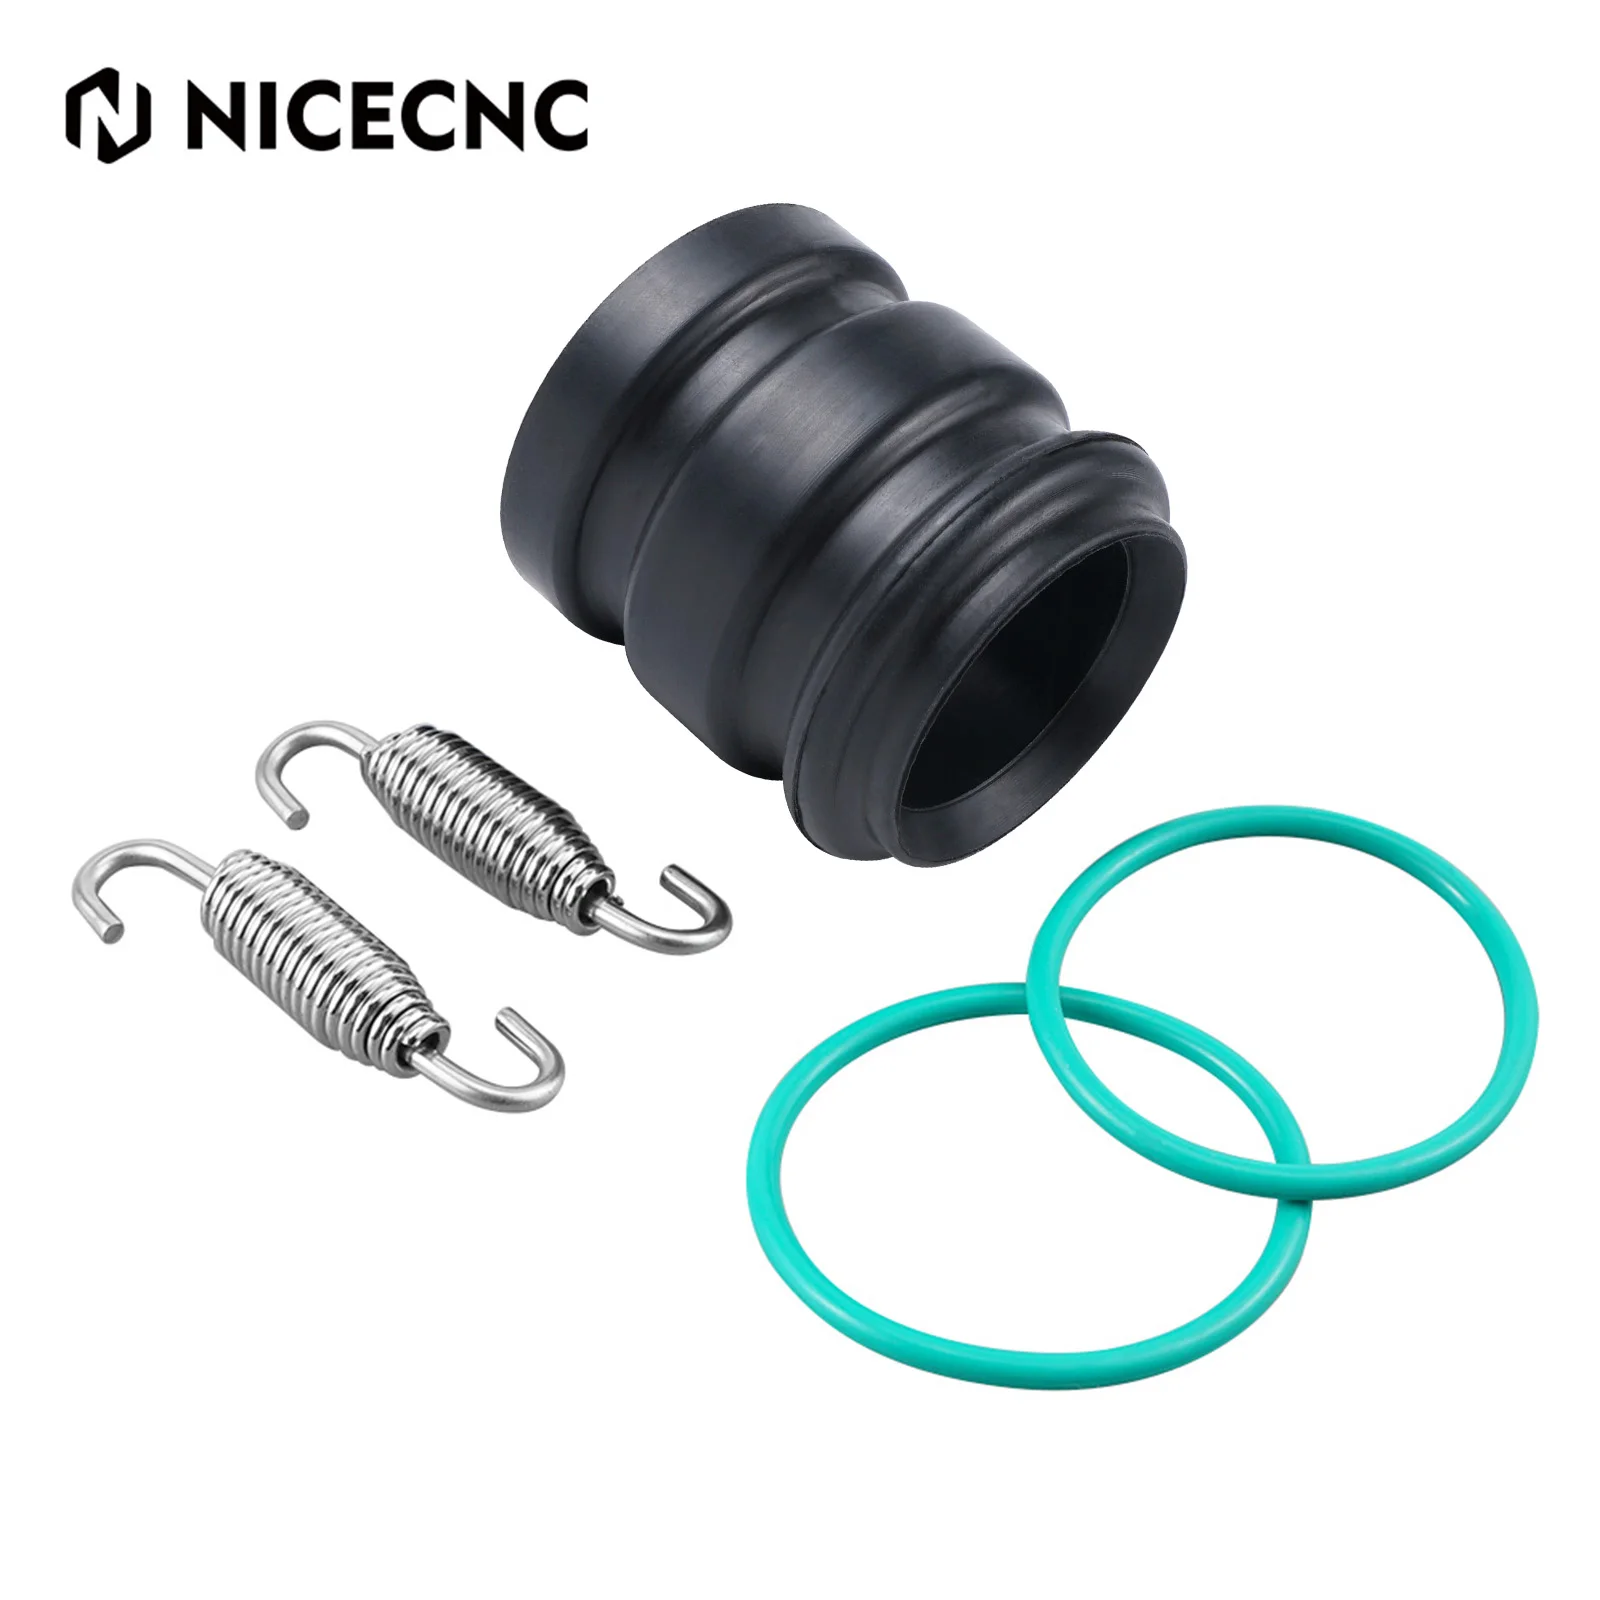 

NiceCNC Exhaust Coupler Kit Muffler Silencer Tailpipe Rubber Seal For KTM EXC XC SX XCW MXC Six Days Freeride 250 300 1998-2016